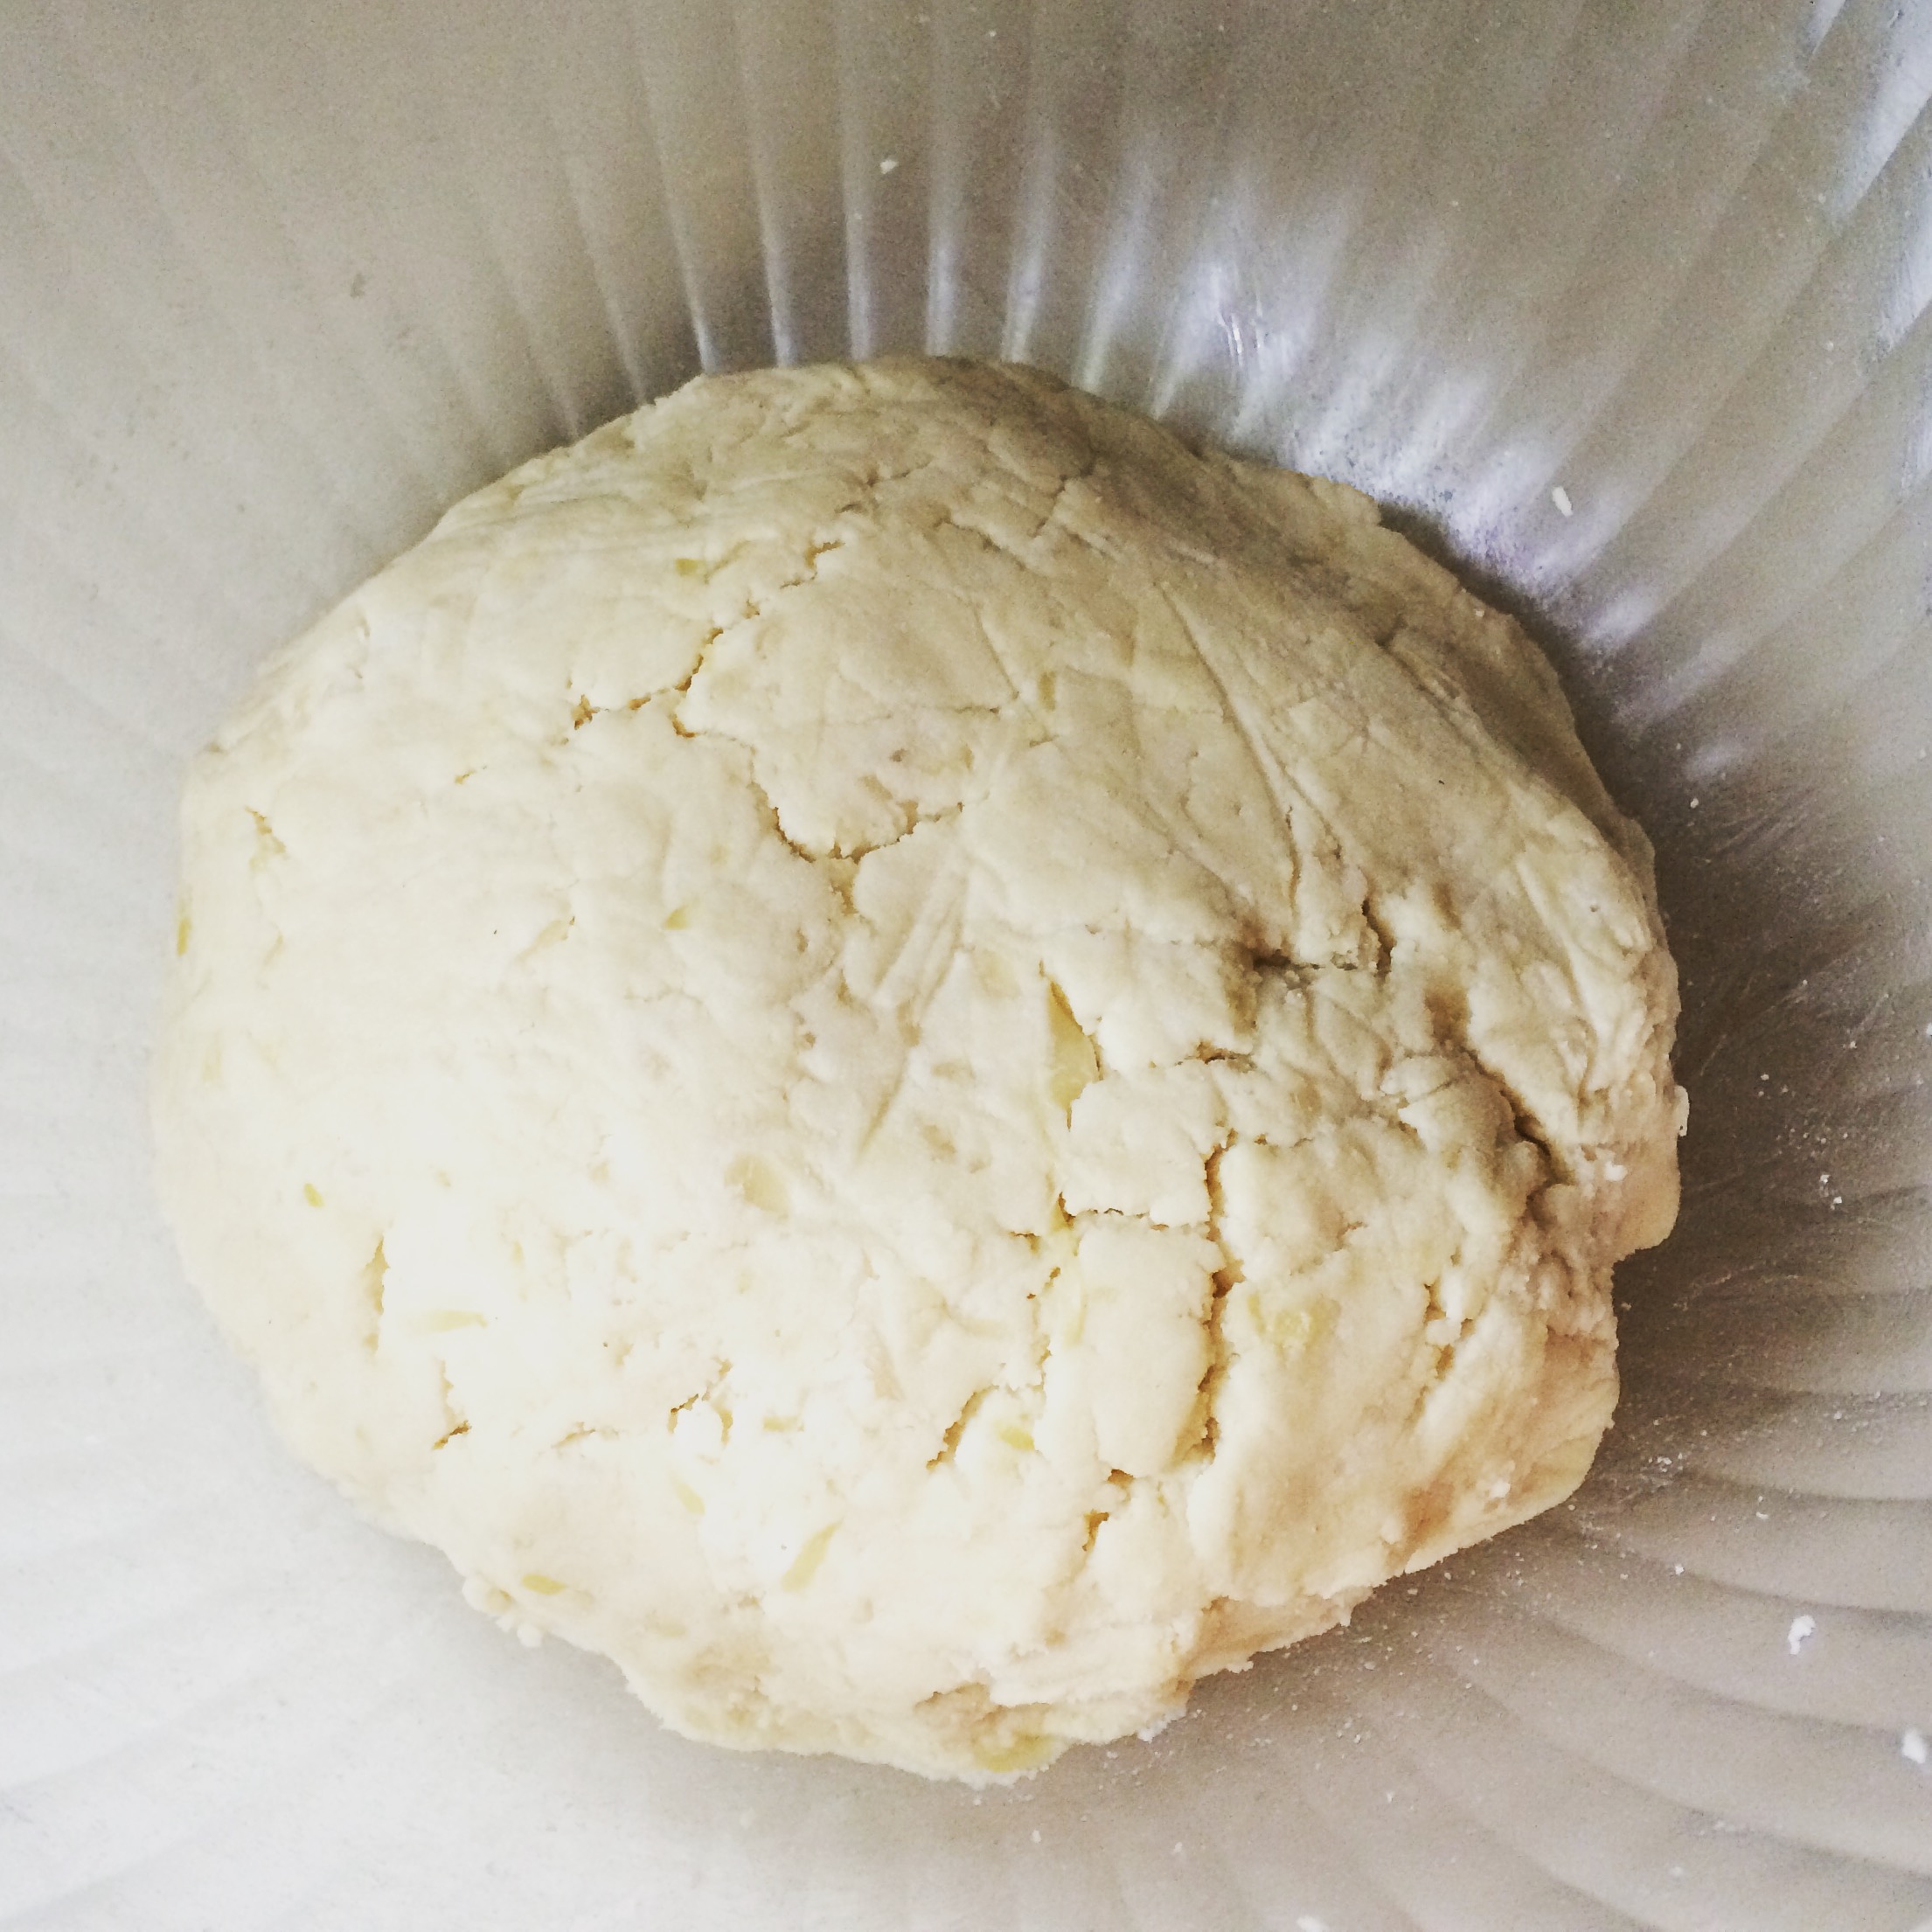 Clear bowl with dough ball in center, kneaded.